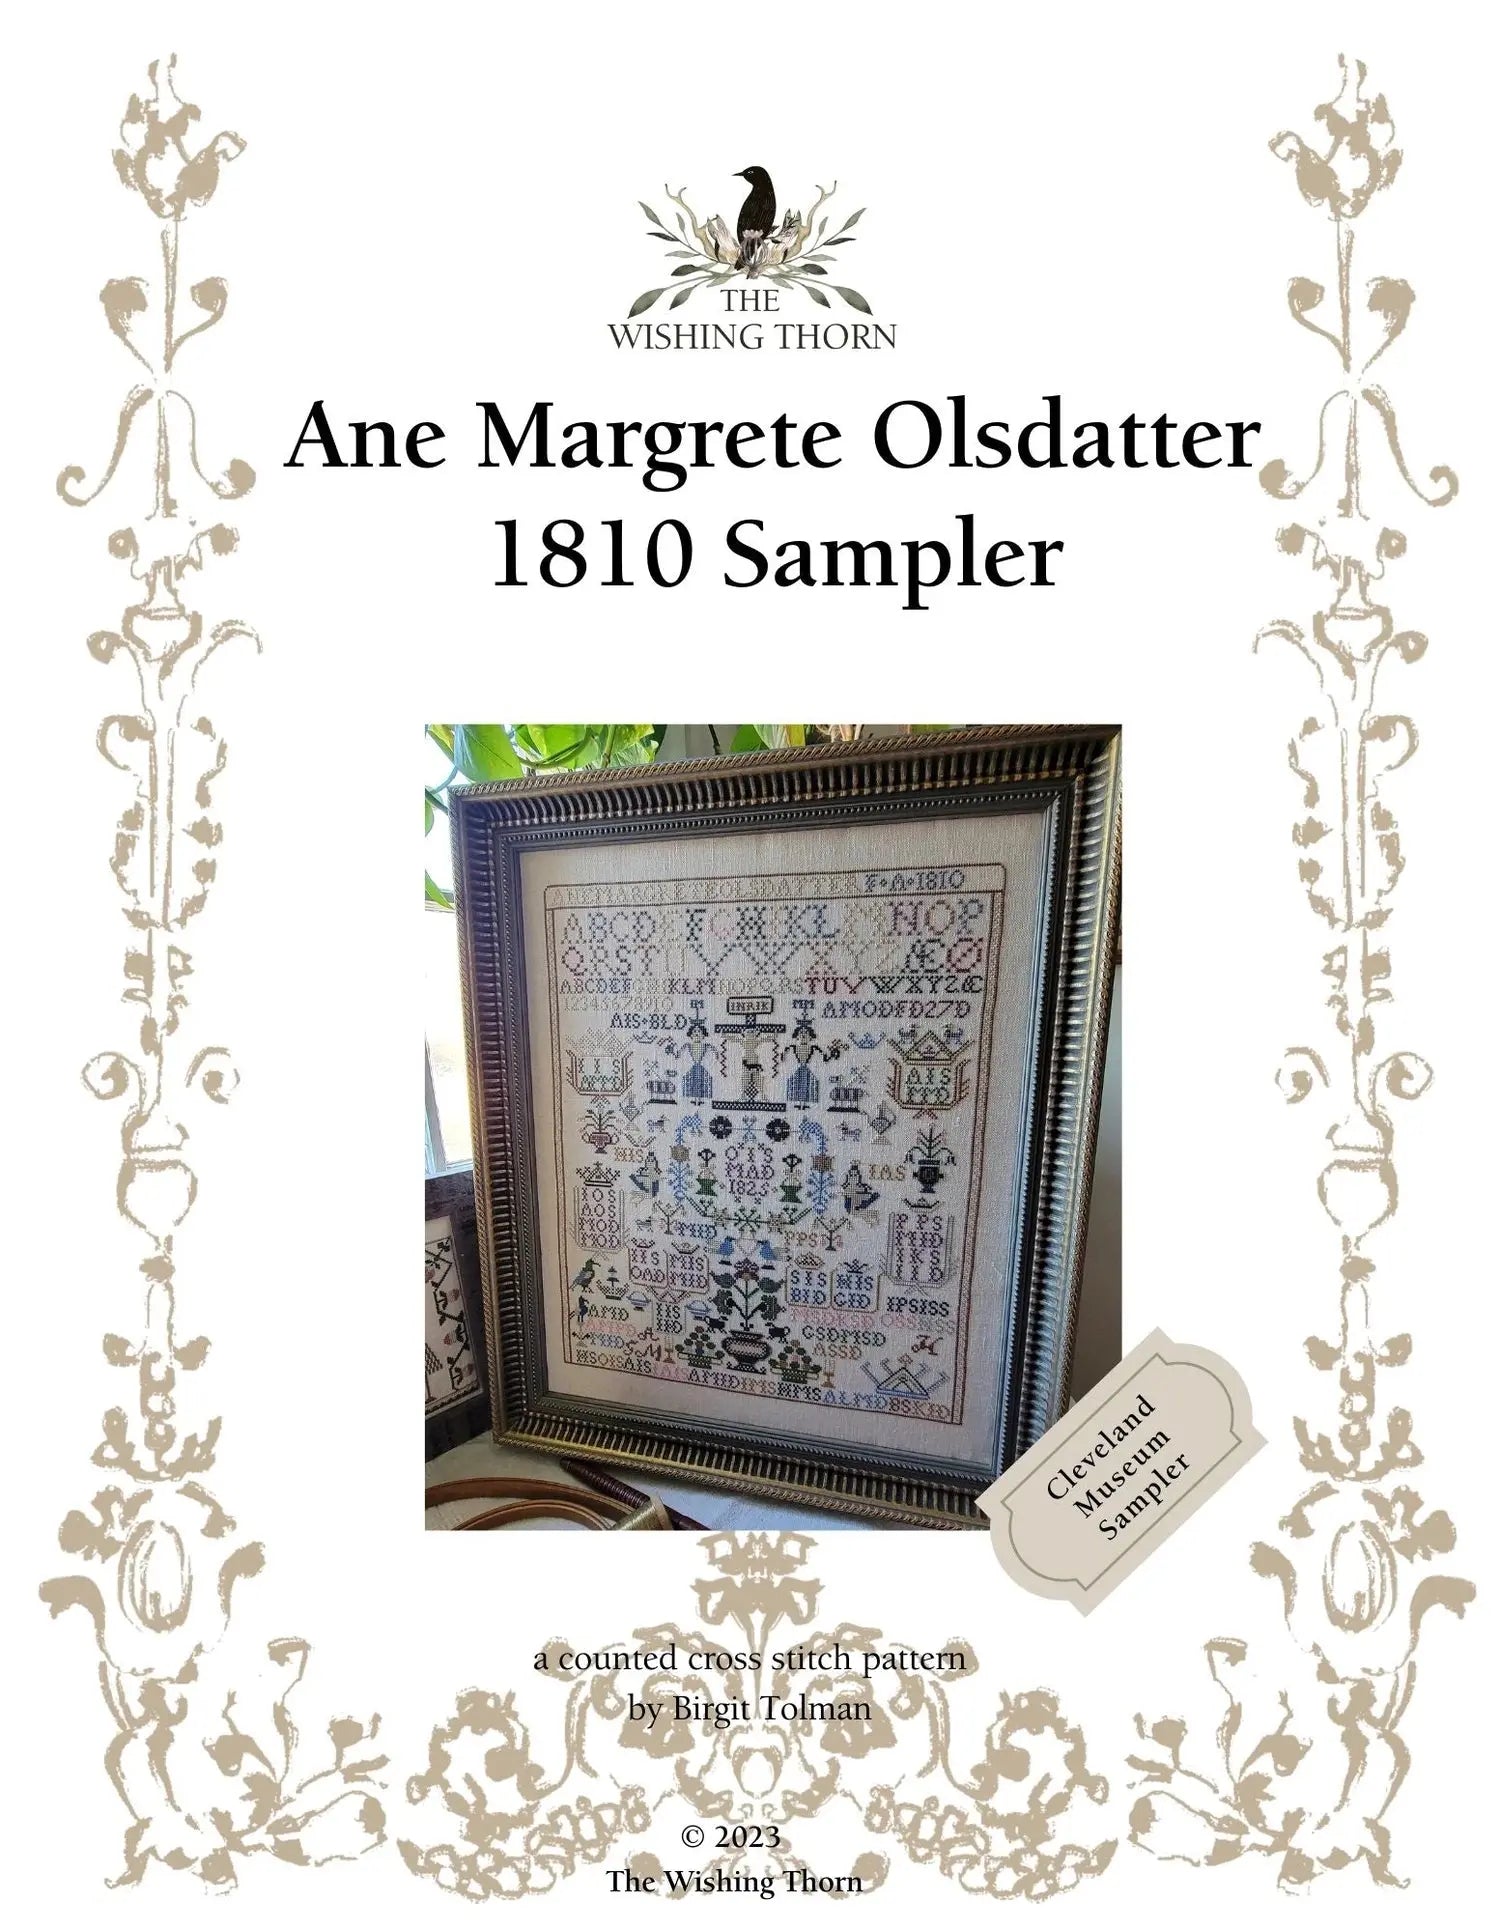 Ane Margrete Olsdatter 1910 Sampler by The Wishing Thorn The Wishing Thorn